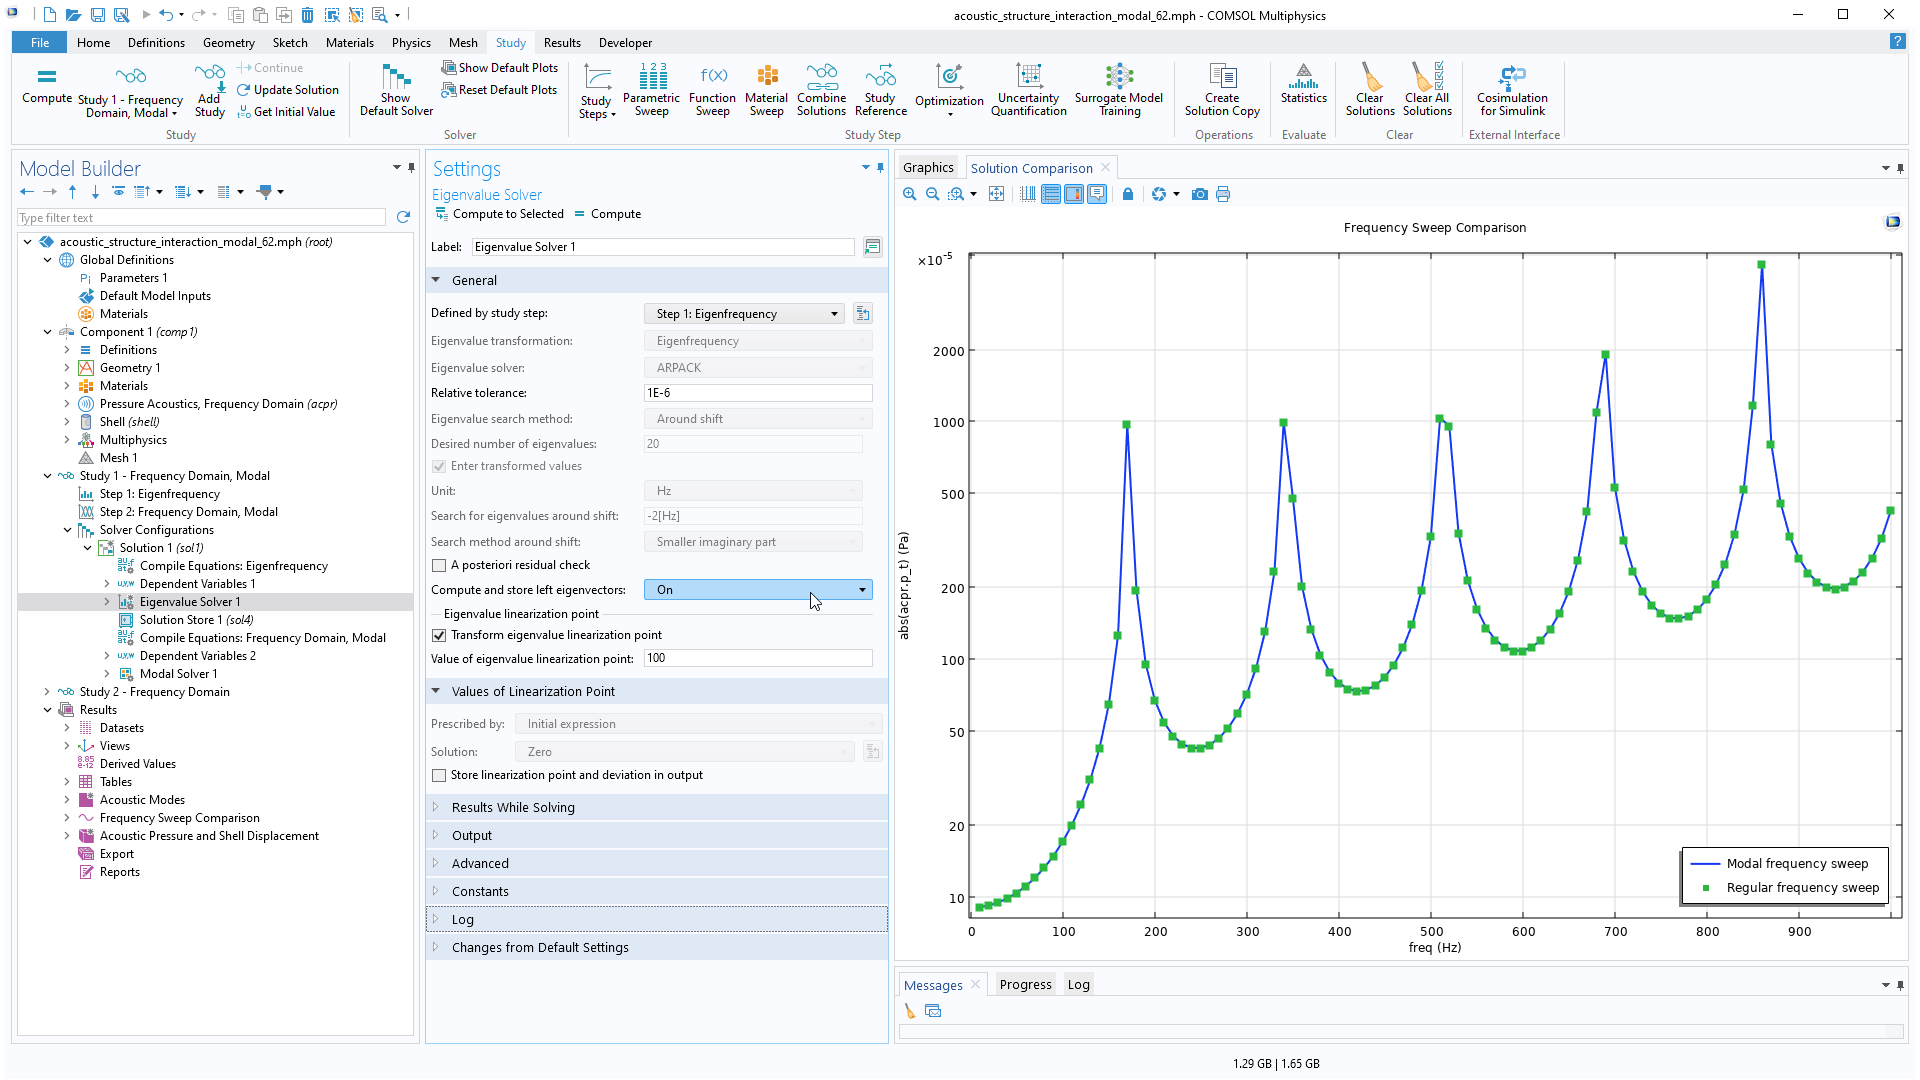 The COMSOL Multiphysics UI showing the Model Builder with the Eigenvalue solver configuration node highlighted, the corresponding Settings window, and a 1D solution comparison plot in the Graphics window.